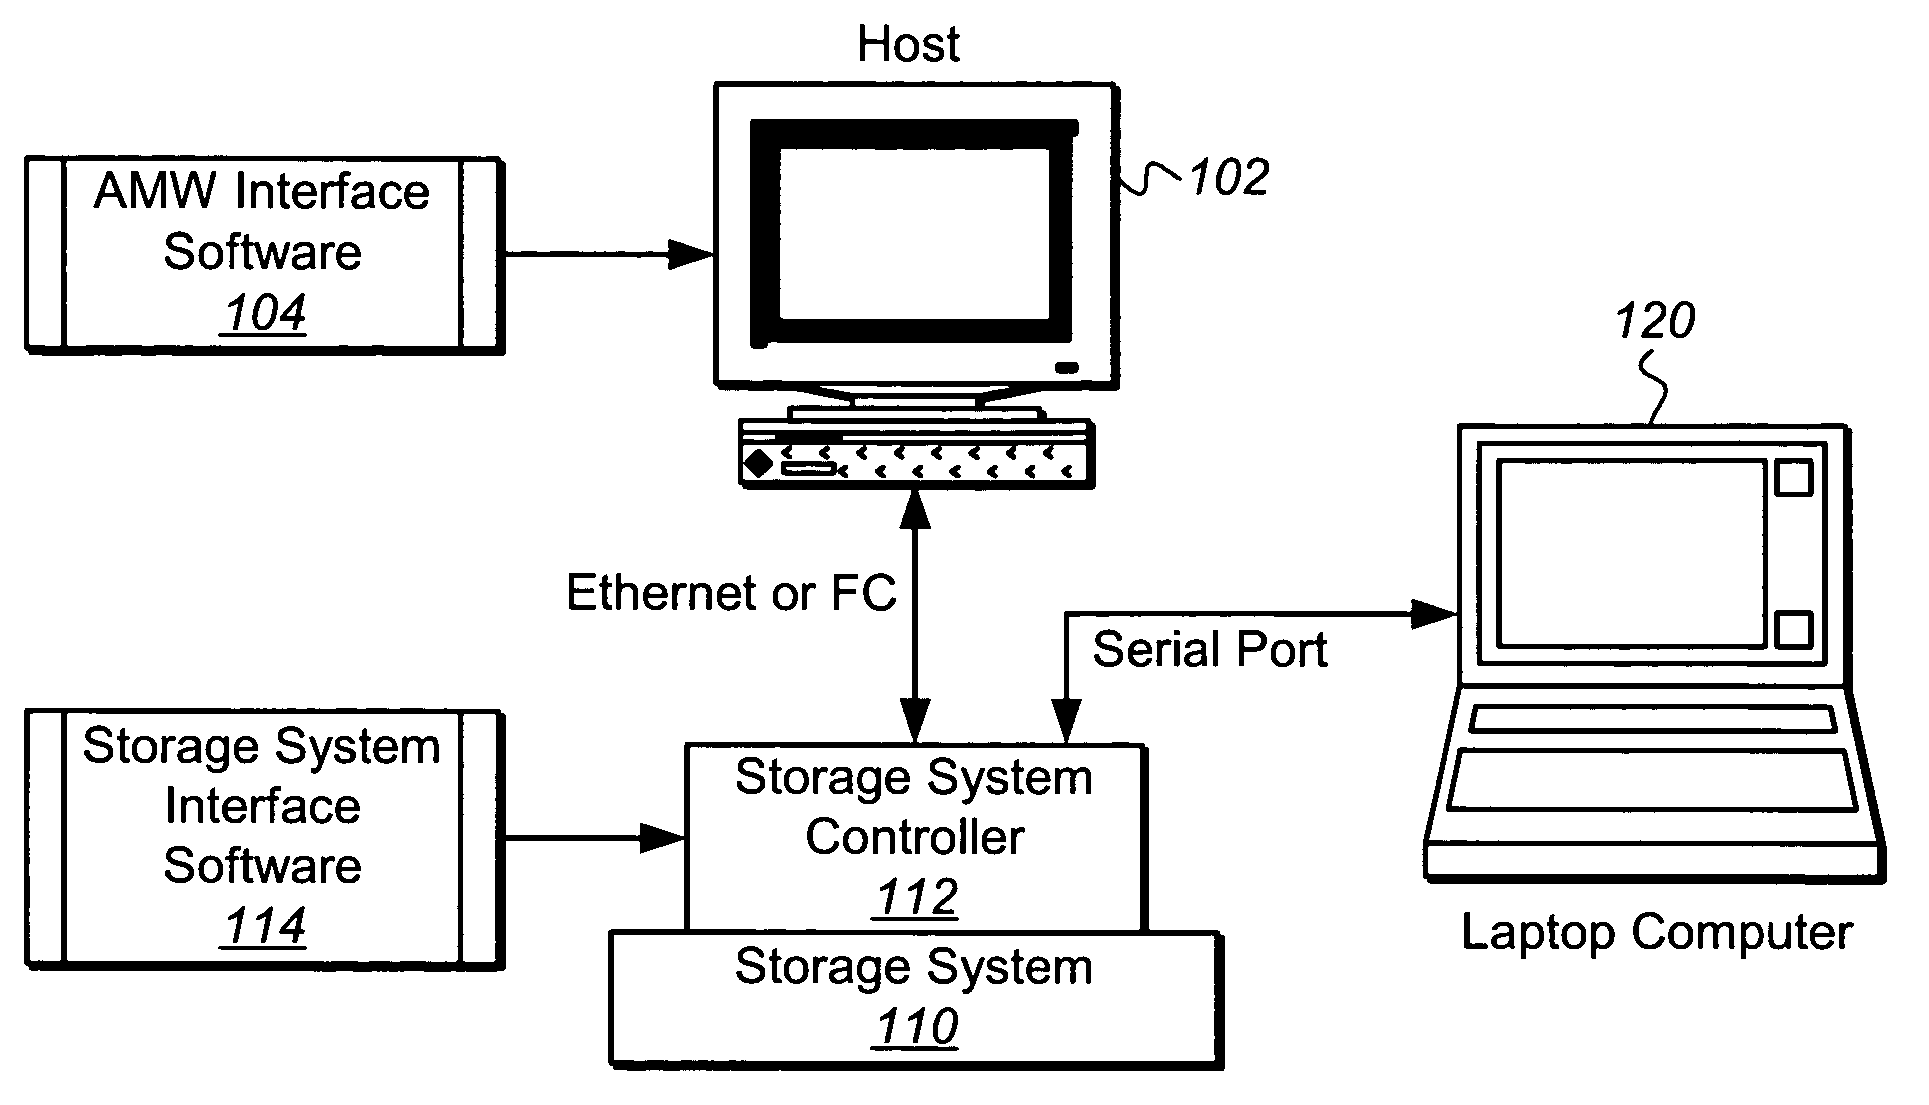 Serial port initialization in storage system controllers